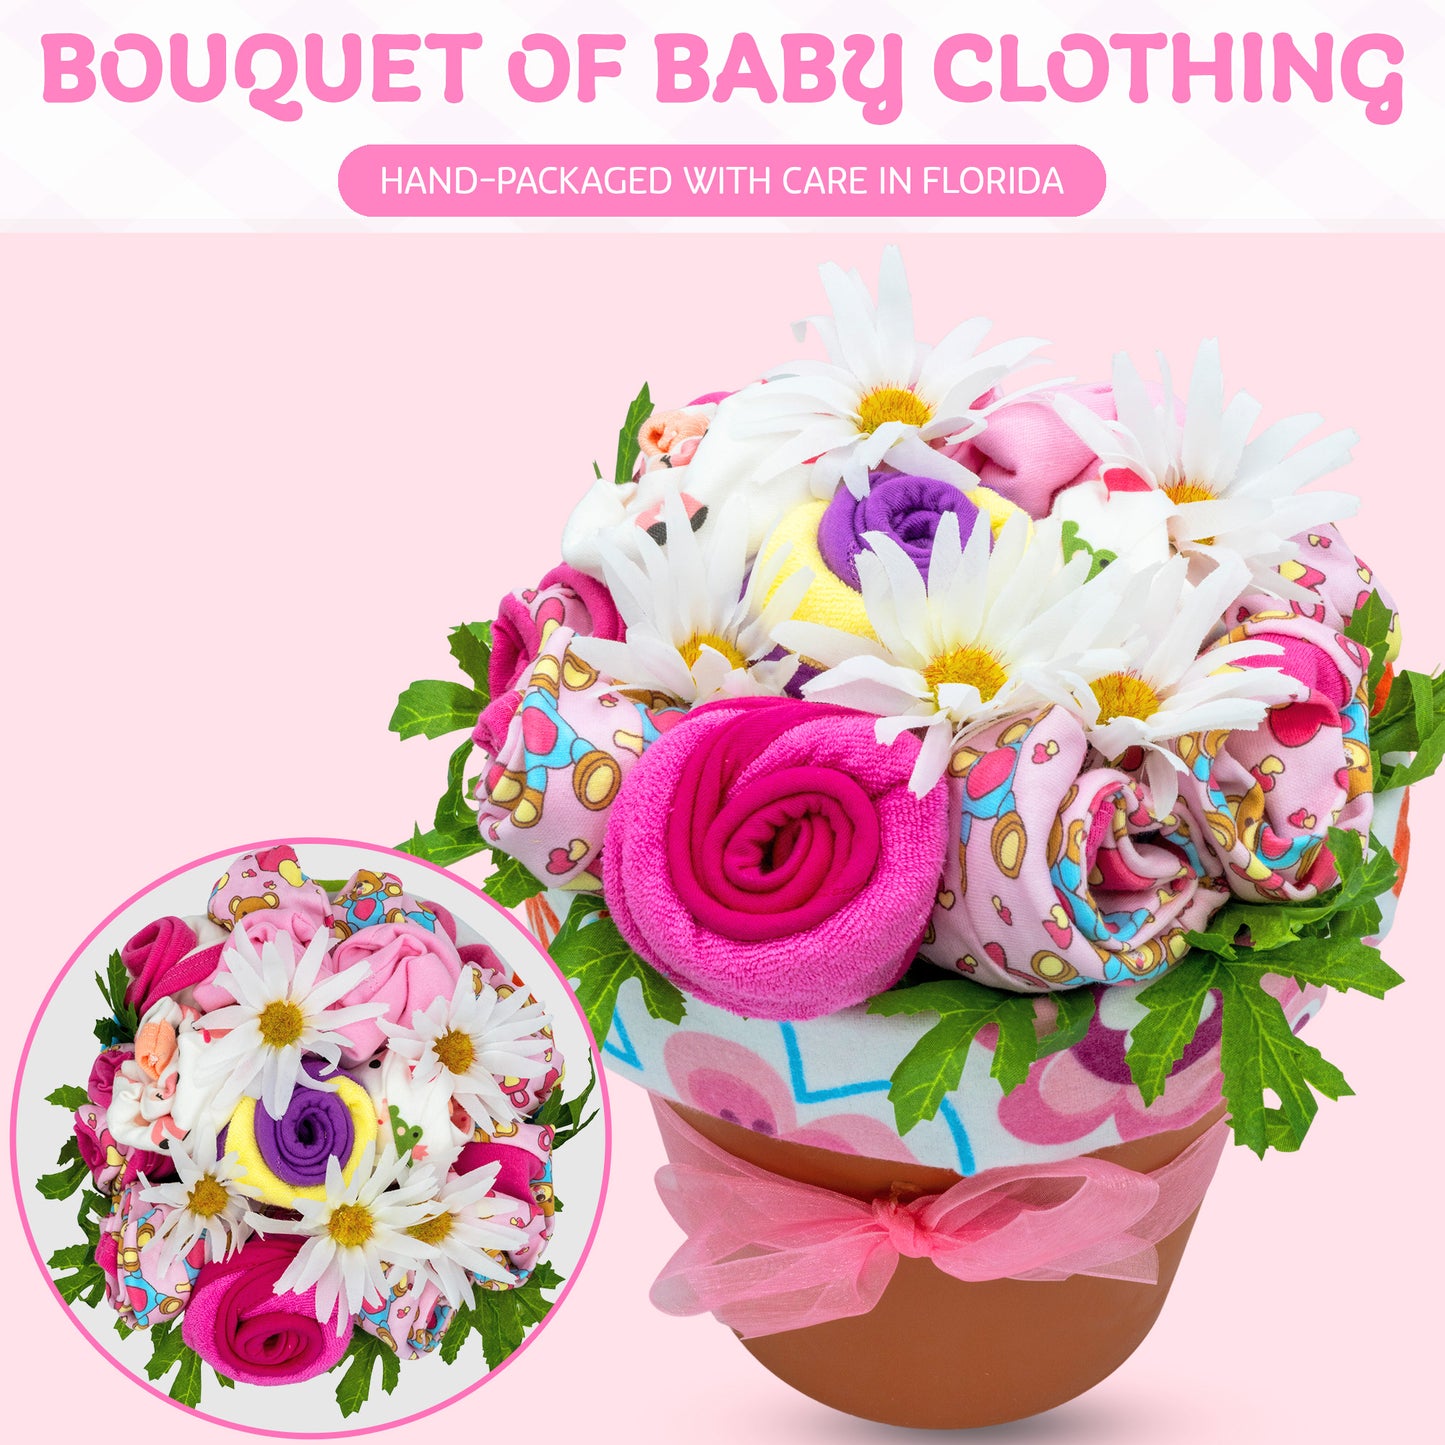 Baby Clothing Flower Bouquet, New Baby Girl Gift Basket with Baby Clothing Arranged Like Celebration Flowers, Creative Unique Baby Gift for New Parents, Includes Teddy Bear Clothing Set